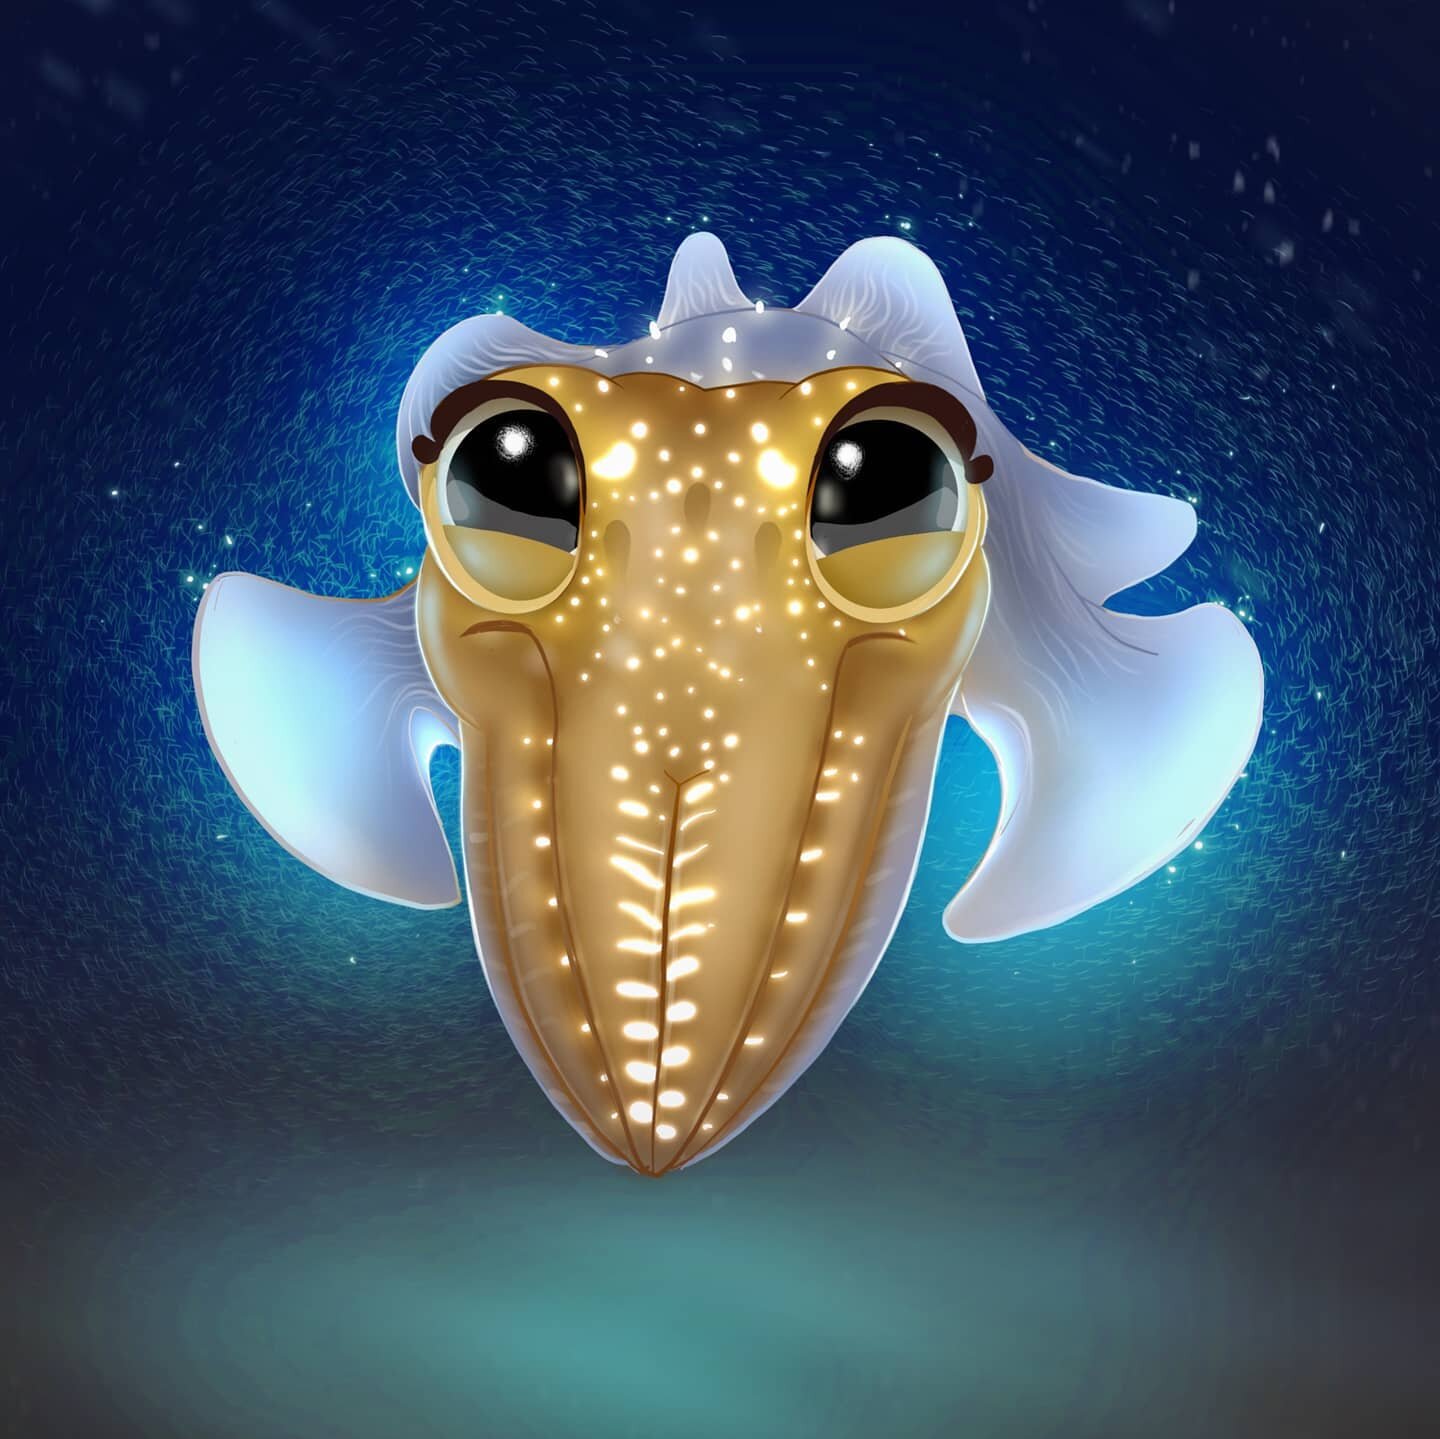 Here is the more realistic version! 
#cuttlefish #cuttlebug
--
Referenced from: @_bugdreamer_ 📹 🌊 🐙
--
#artistic #cartoonanimals #cephalopodsquad #fishart #kawaiiart #cuteartwork